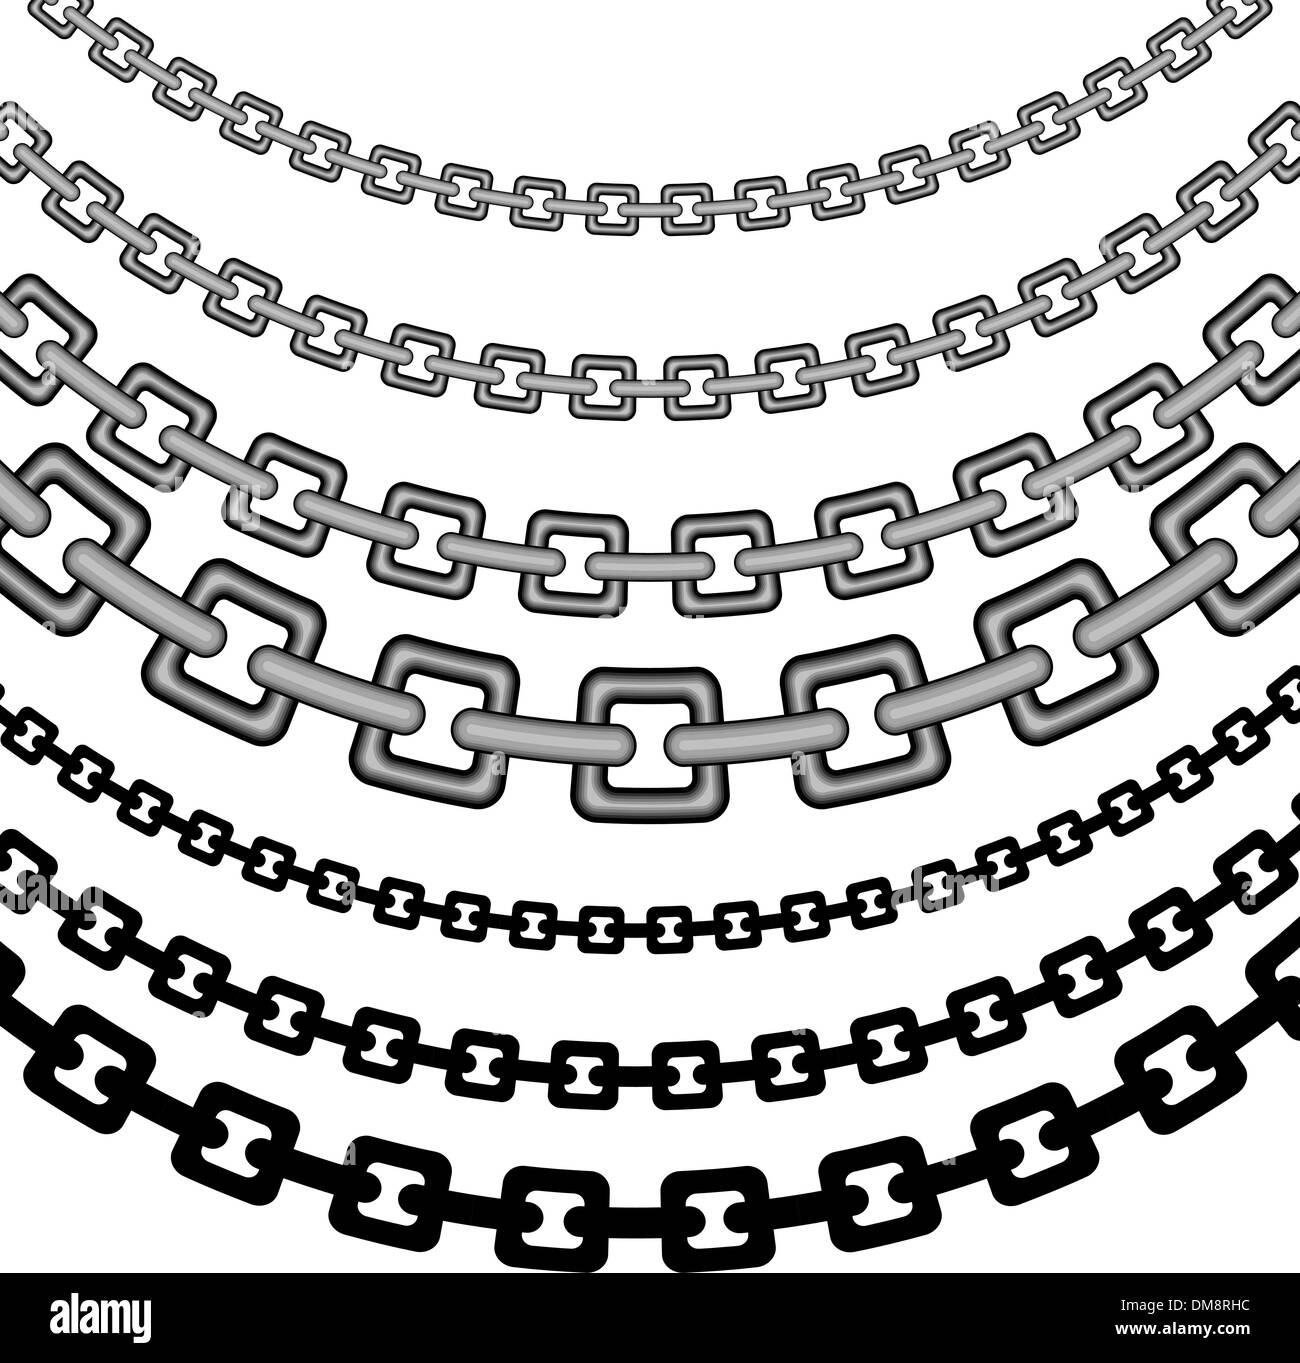 Chains curved Stock Vector Images - Alamy